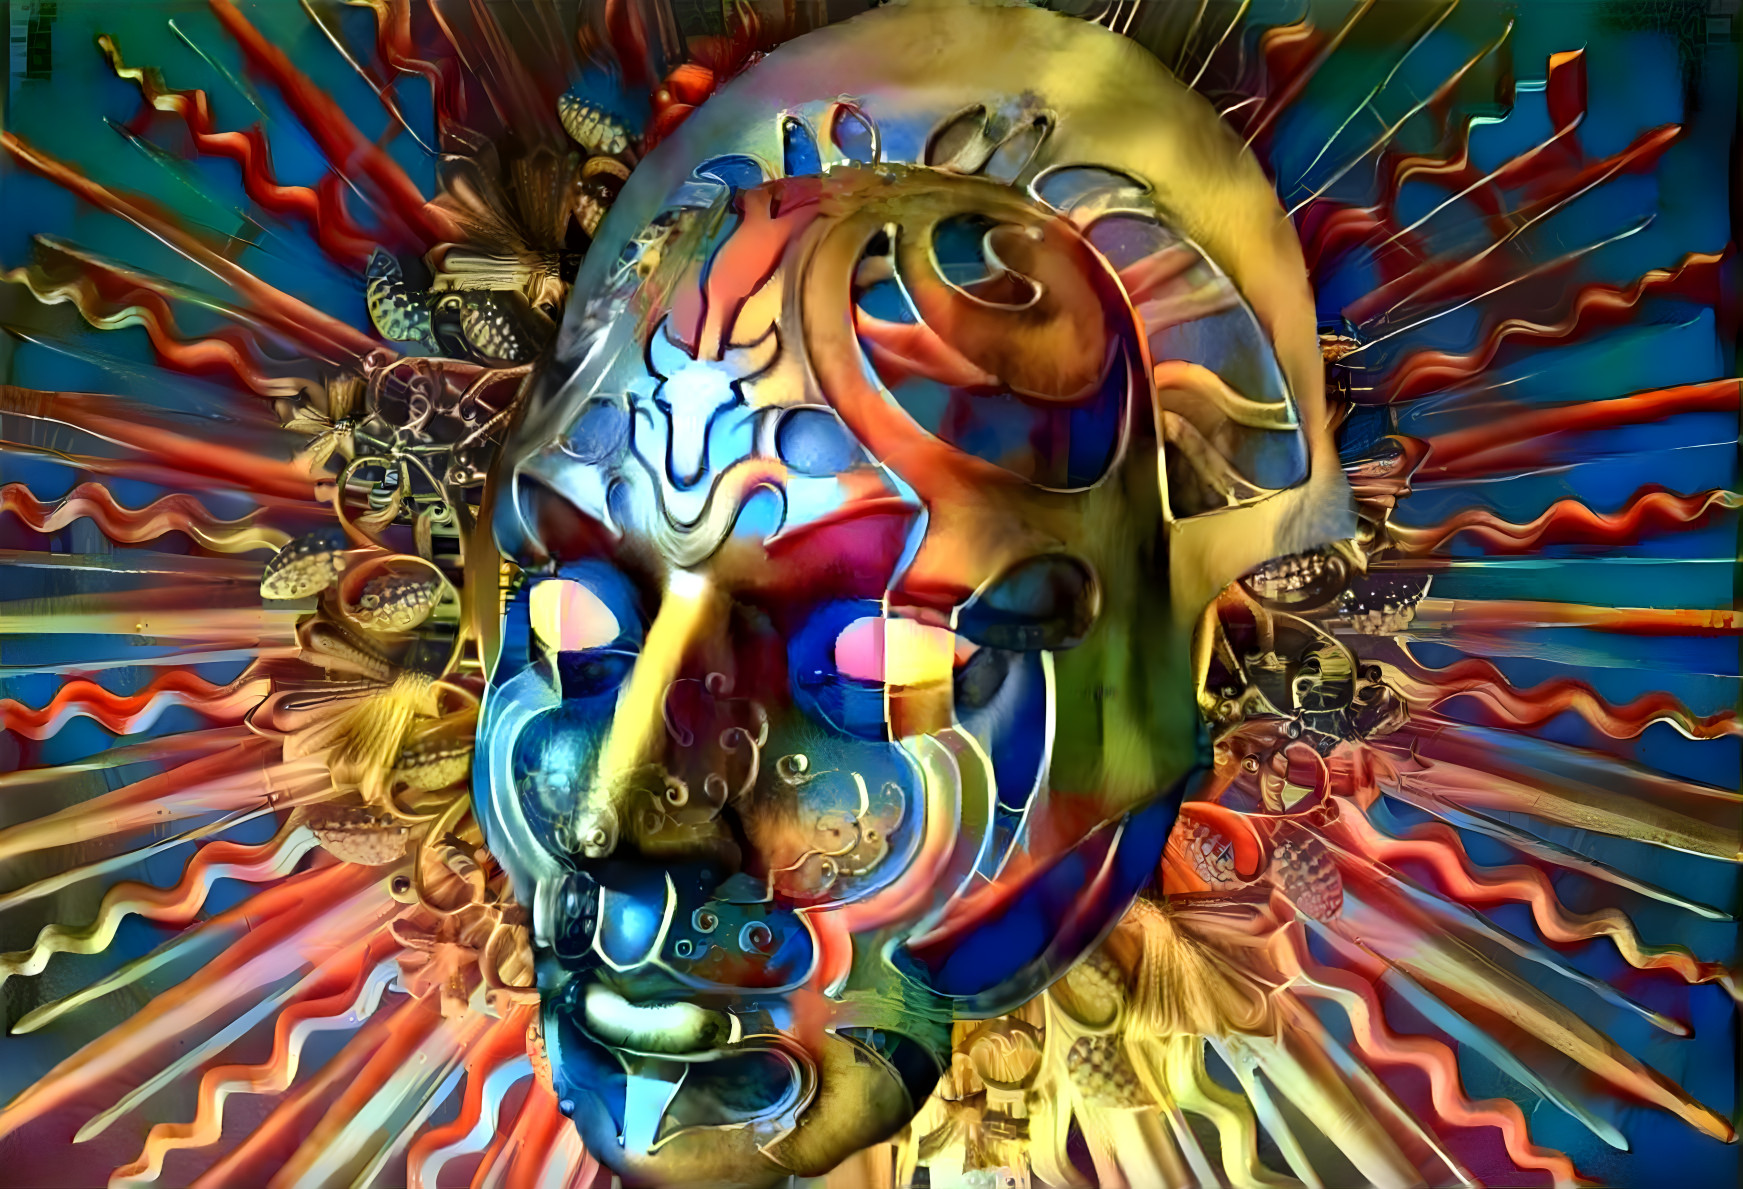 Colorful Mask [FHD]